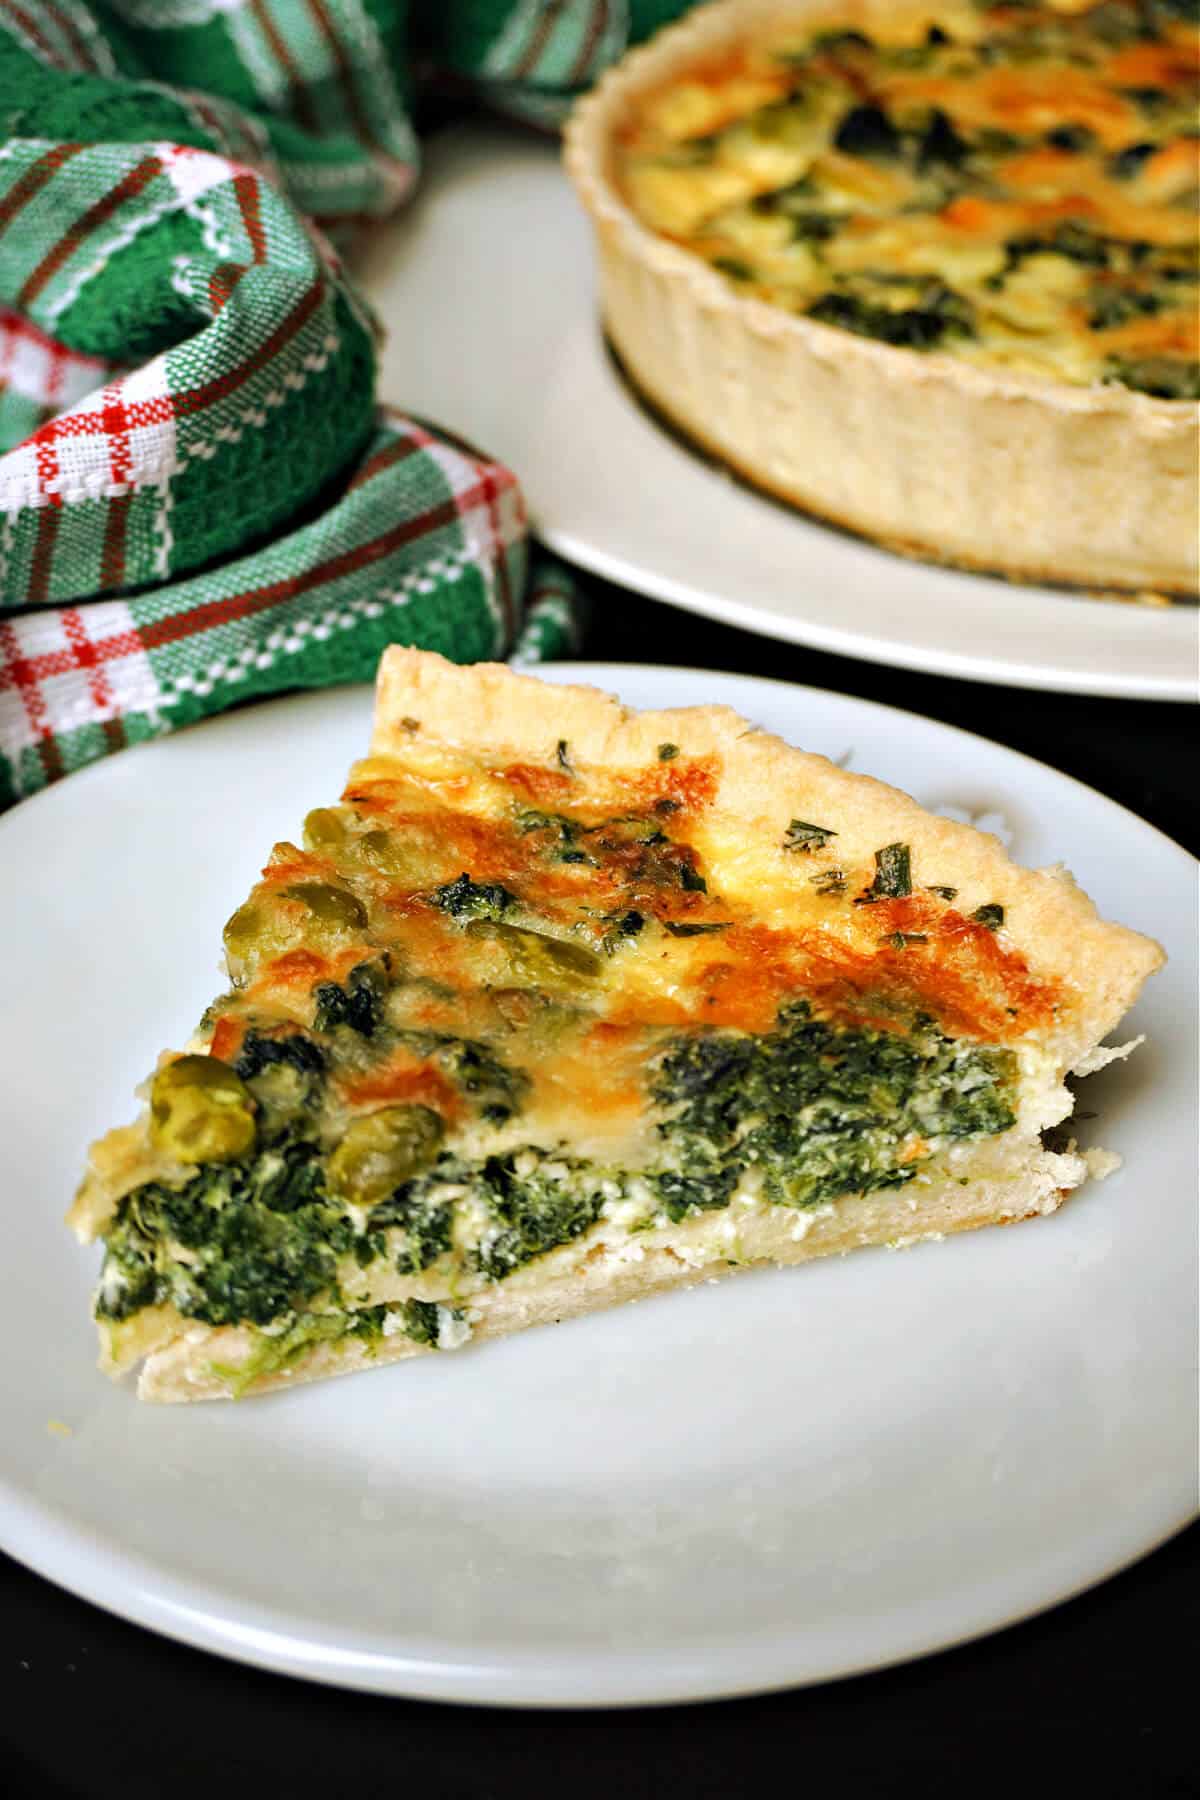 A slice of Coronation quiche on a white plate with the rest of the quiche in the background.